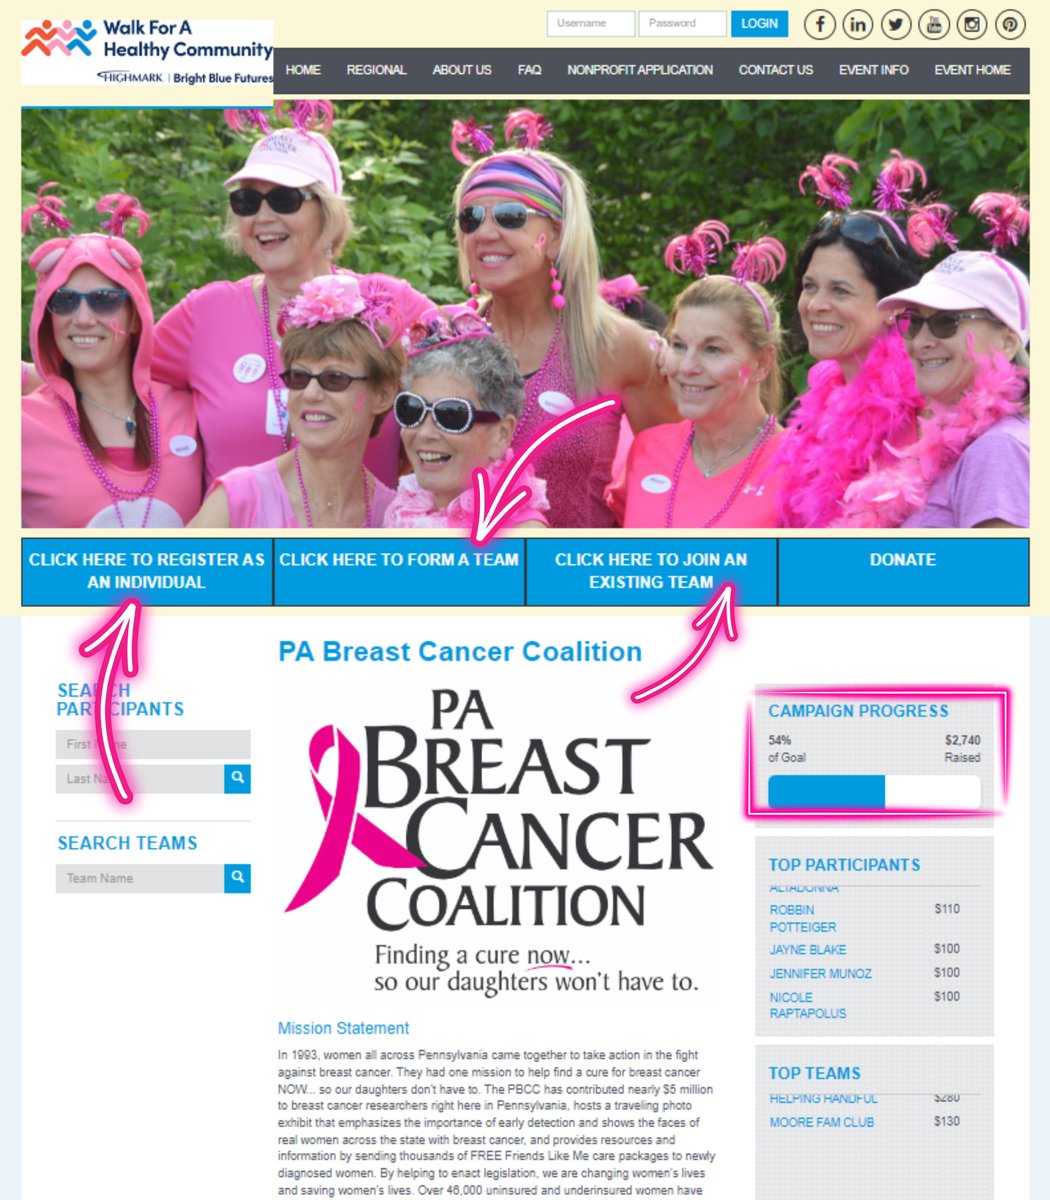 We're just under 4 WEEKS away from the Highmark Walk for a Healthy Community and we've reached 54% of our goal! 🌟 But we still want YOU to register and walk with us in honor of breast cancer patients across PA! Visit pbcc.me/2024HighmarkWa… to get registered as a walker! 🏃‍♂️🏃🏃‍♀️